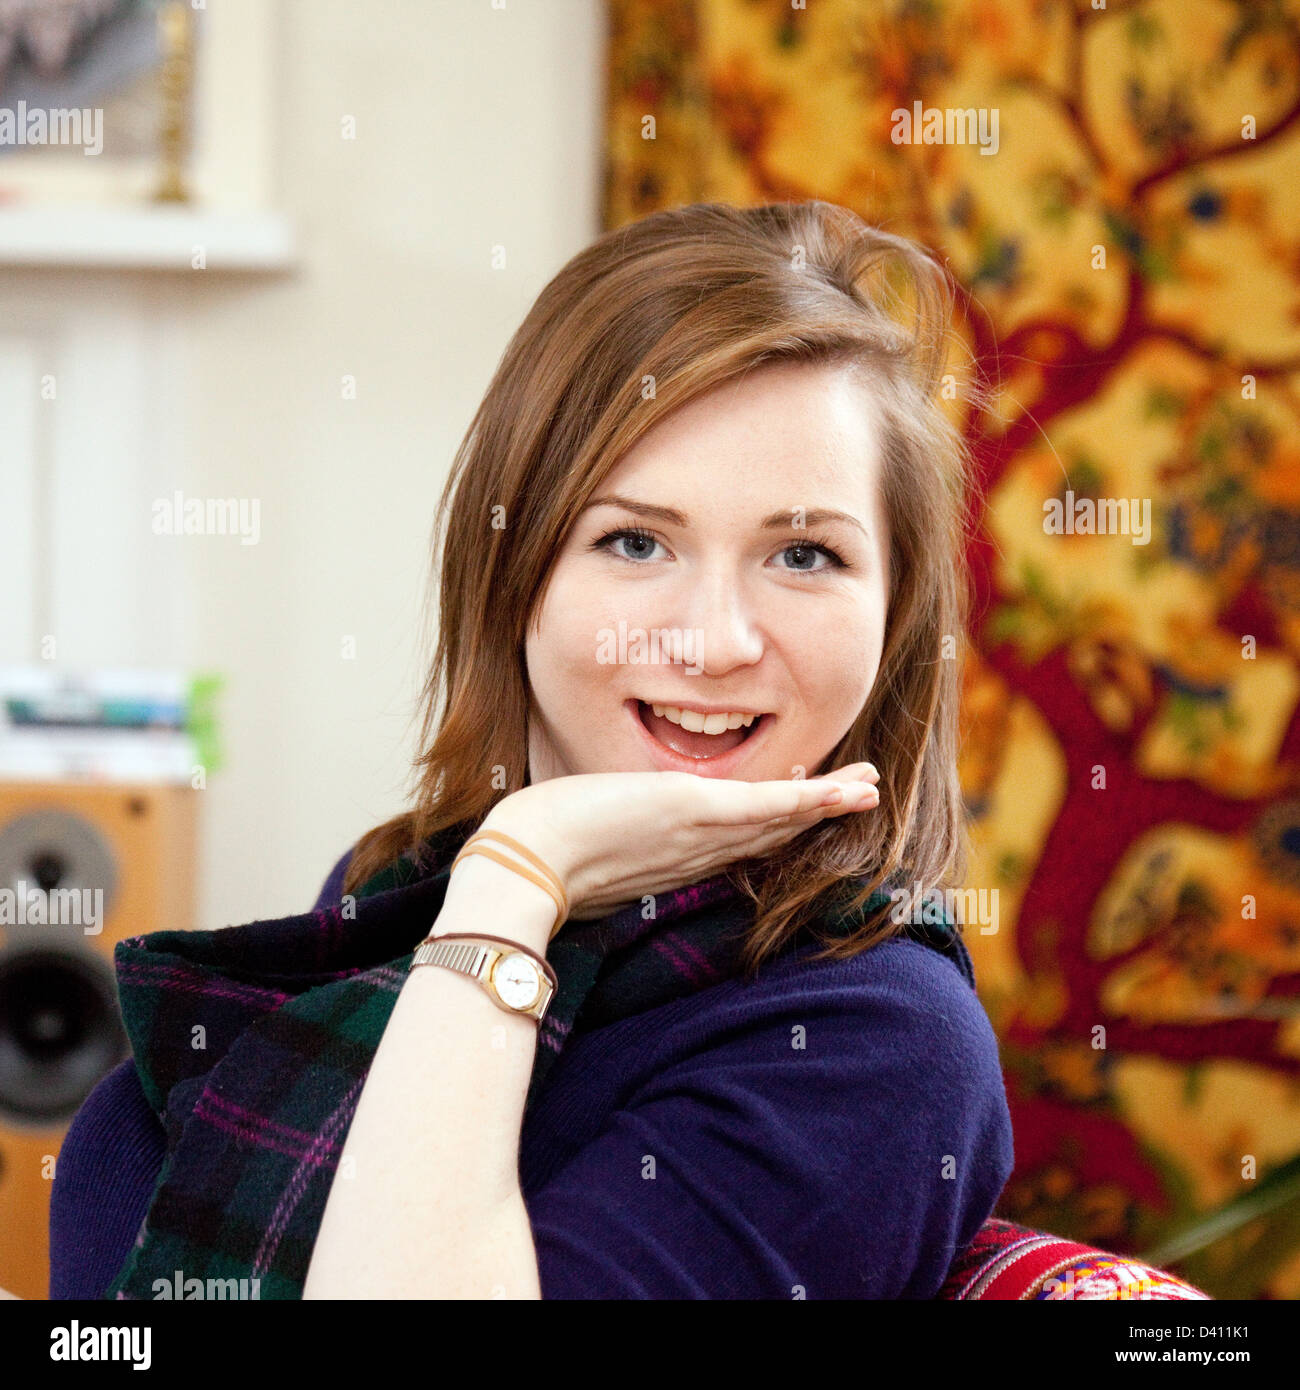 An attractive happy young caucasian brunette woman age aged 20 years old, front view, UK Stock Photo